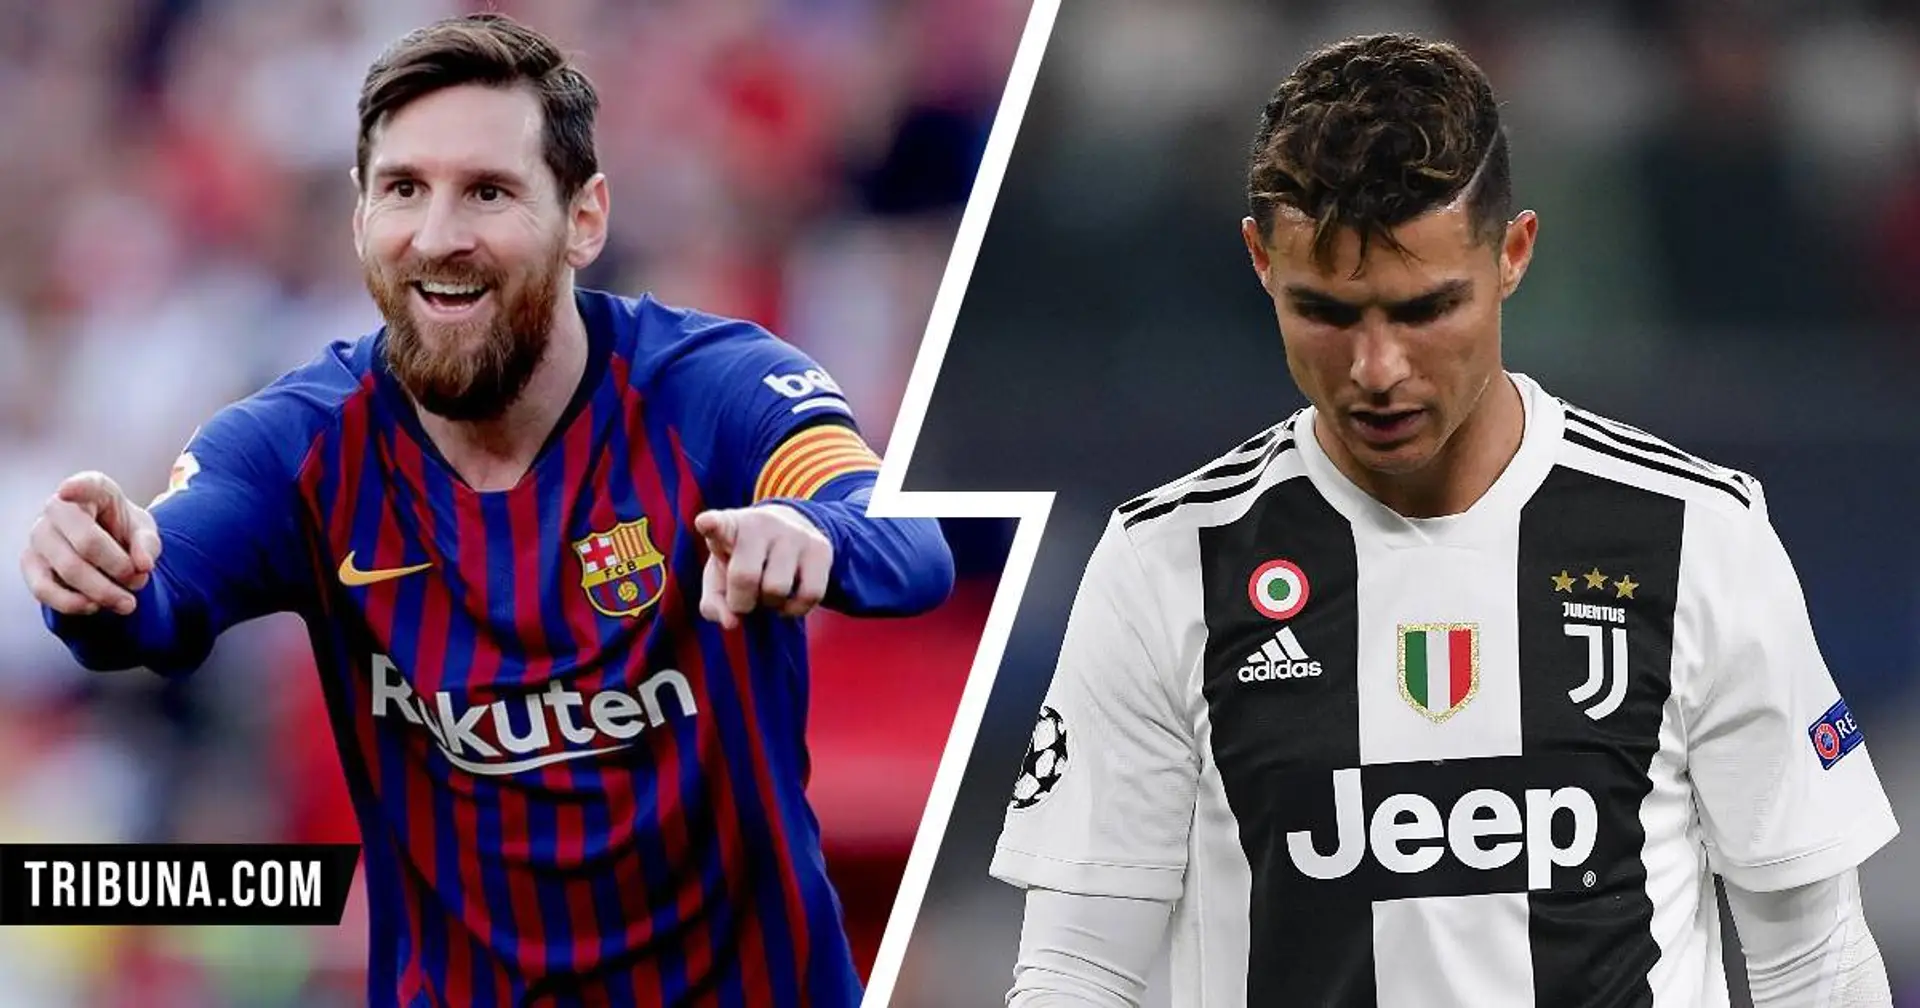 Messi's 4 qualities Ronaldo will never have